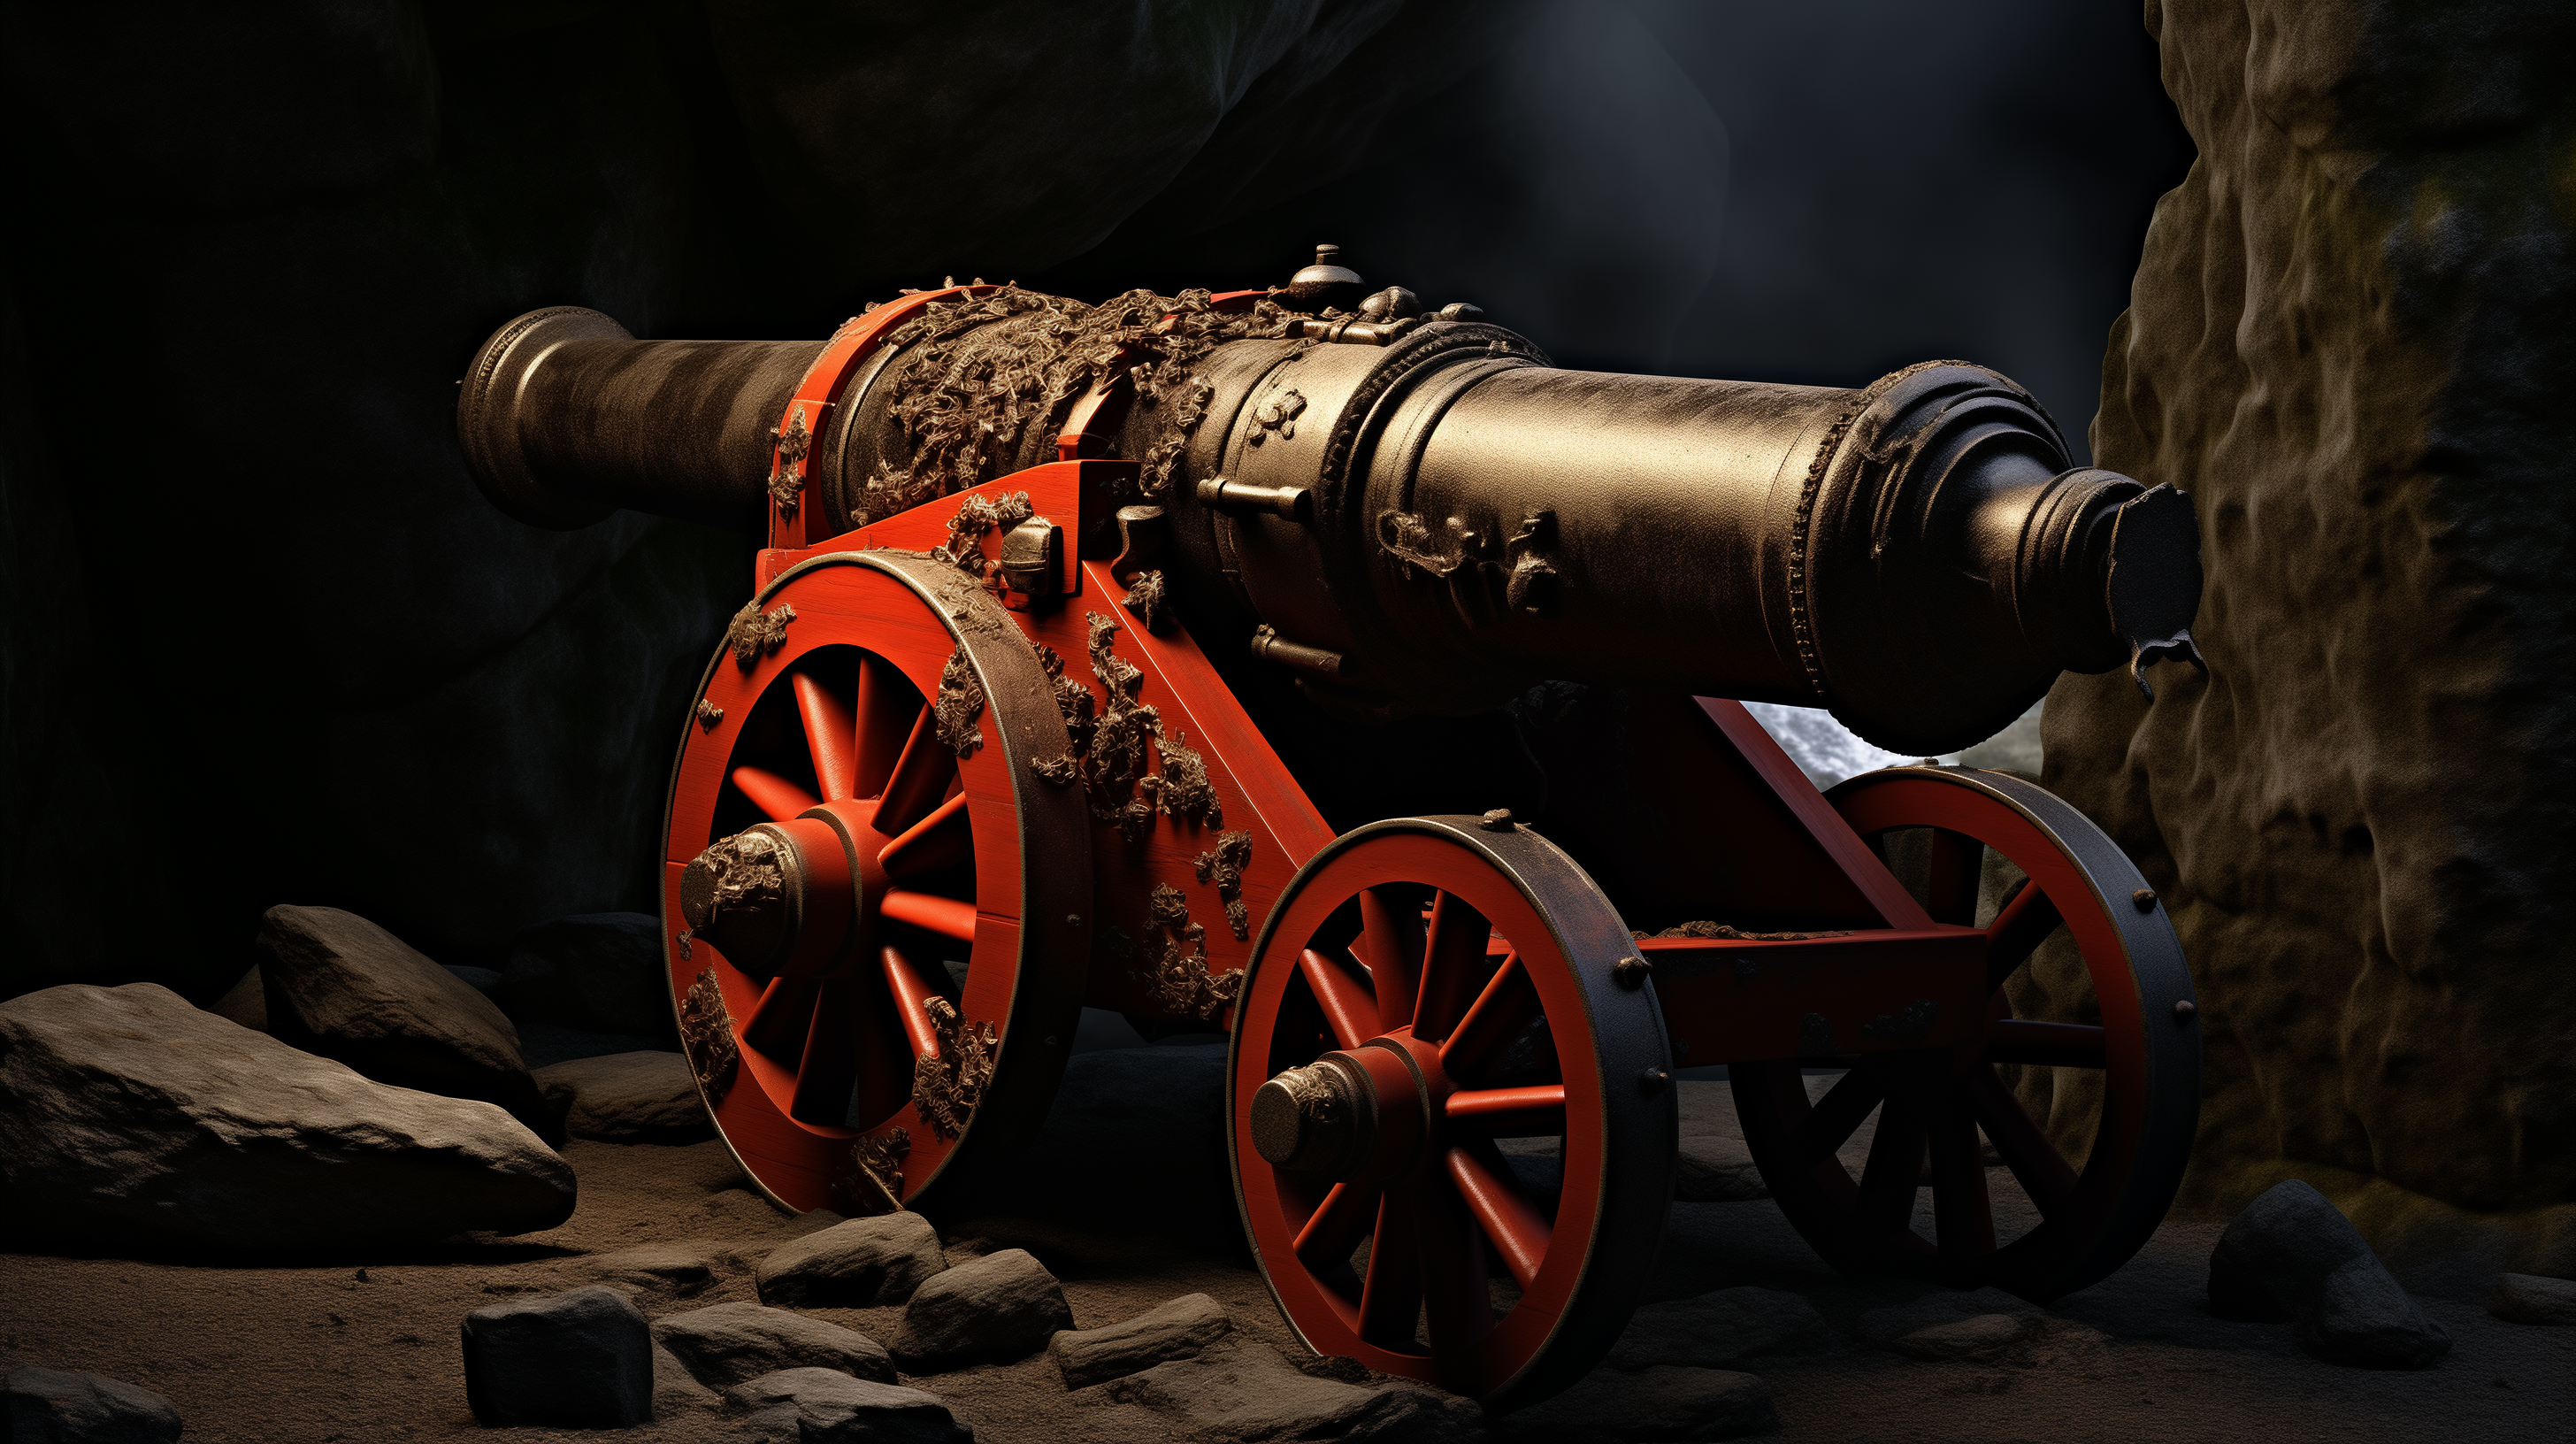 Vintage cannon with ornate detailing displayed in a cave setting, an HD desktop wallpaper and background.